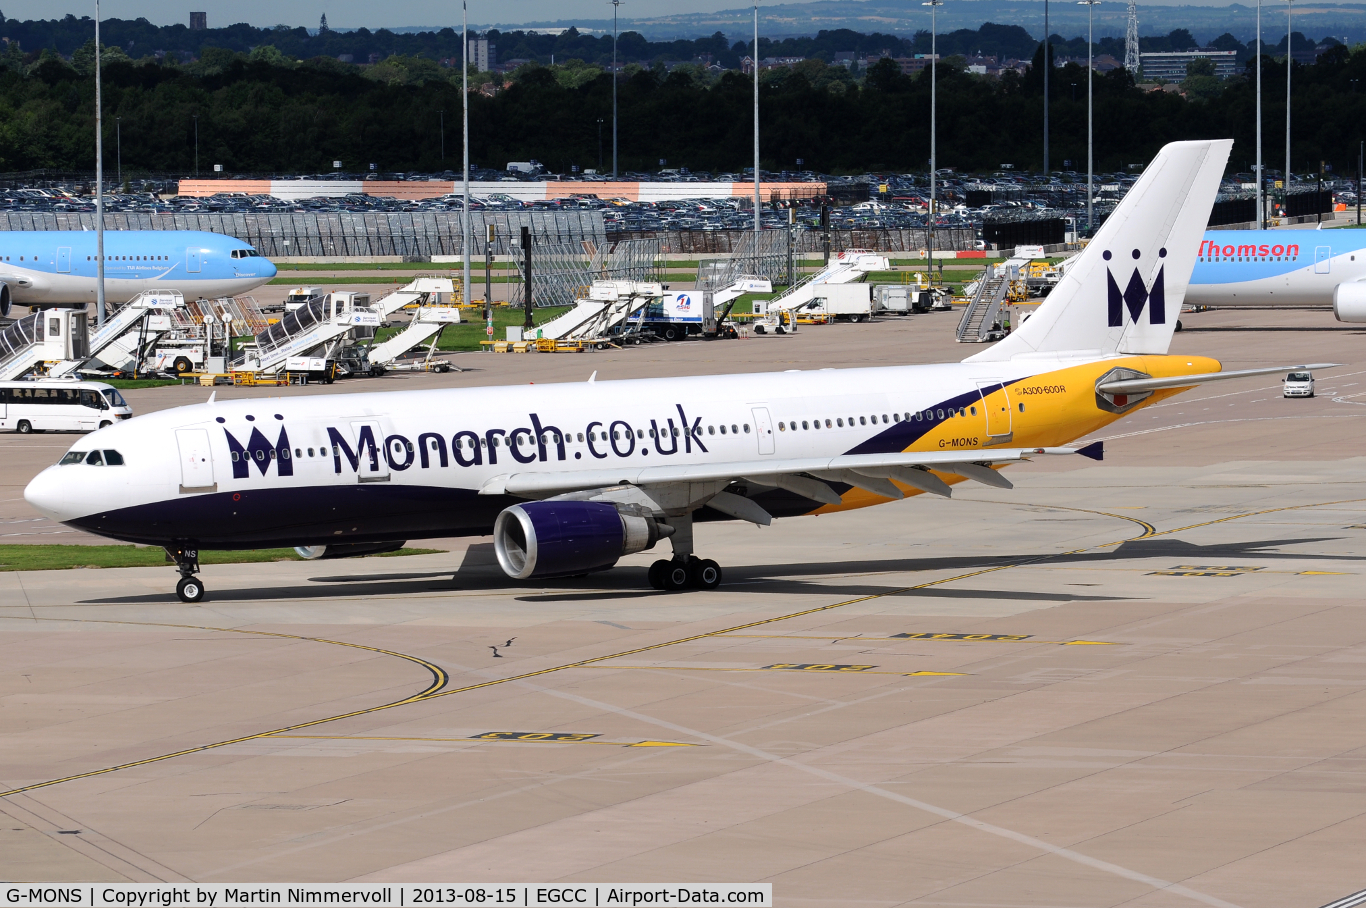 G-MONS, 1989 Airbus A300B4-605R C/N 556, Monarch Airlines